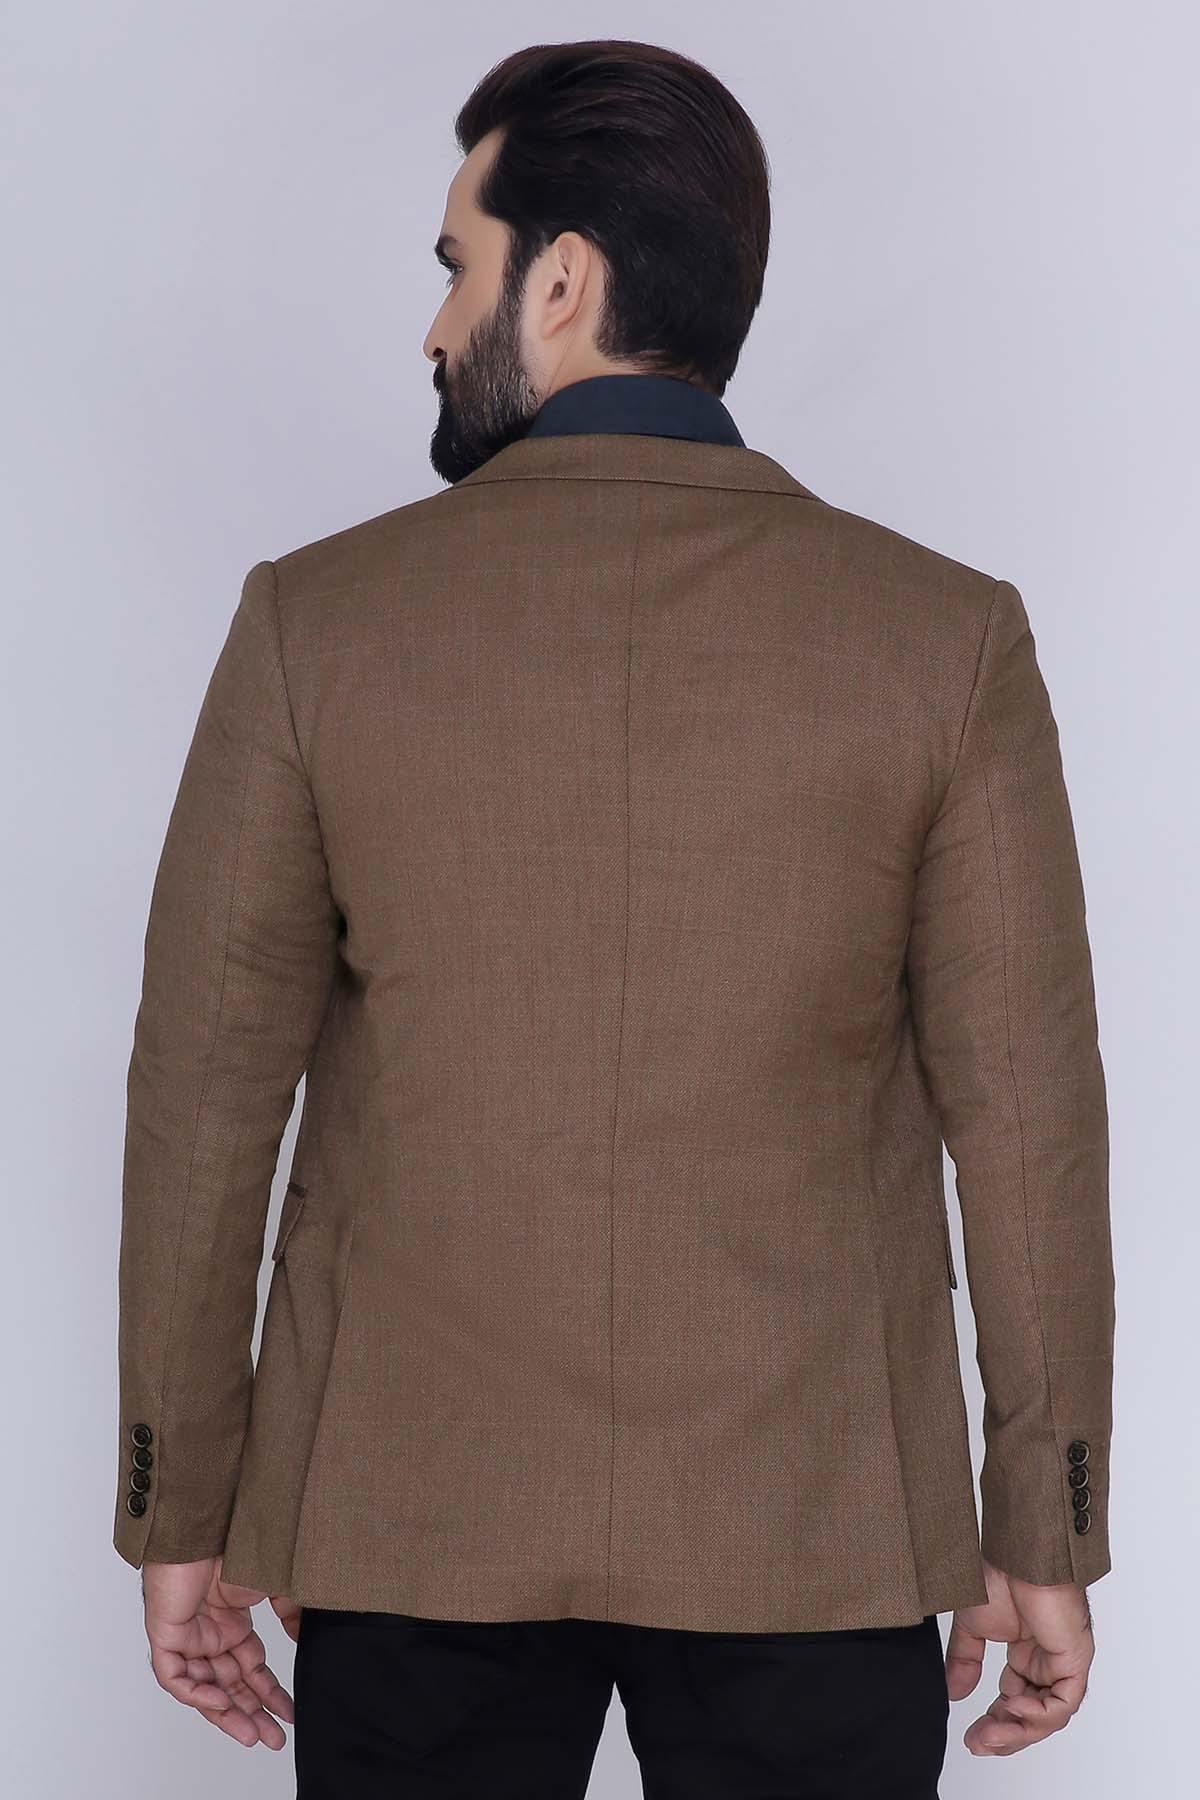 CASUAL COAT 2 BUTTON SLIM FIT BROWN at Charcoal Clothing